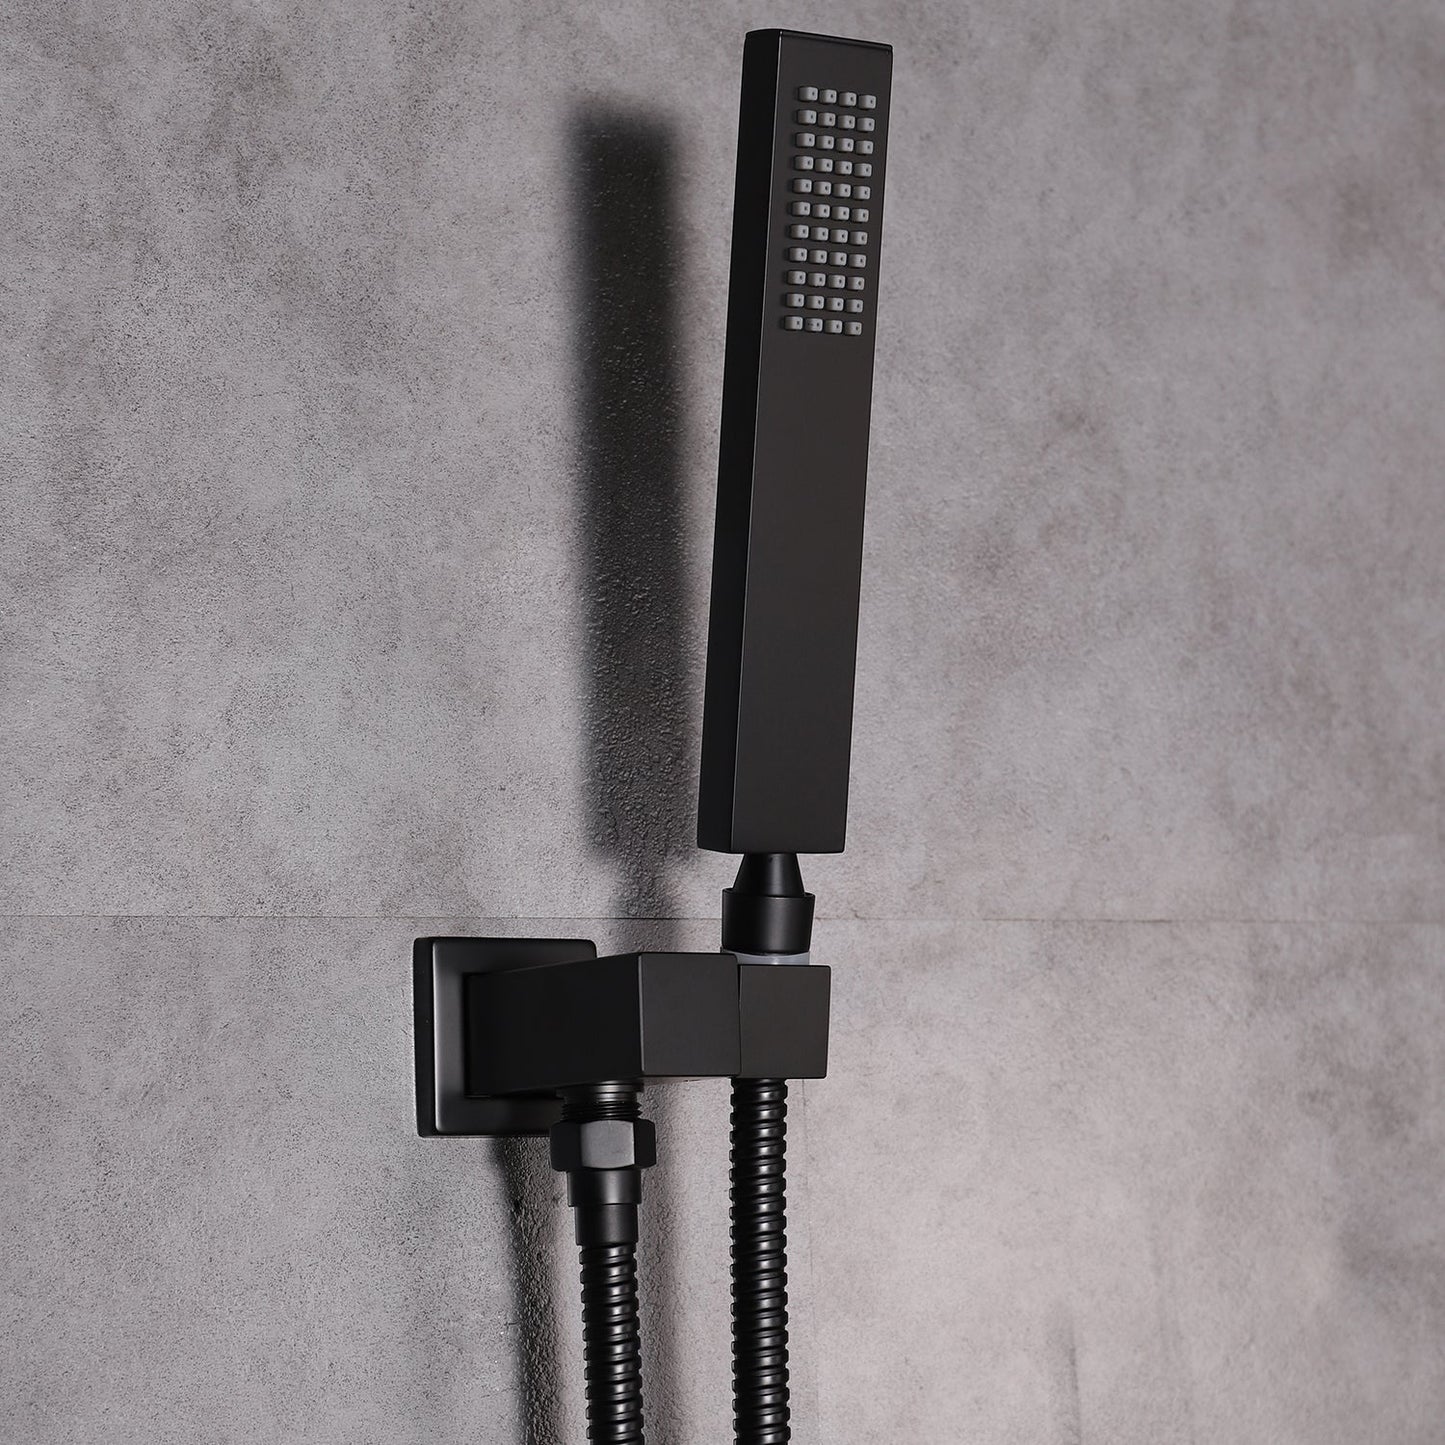 Eviva Beverly Shower and Tub Faucet Set in Matte Black Finish